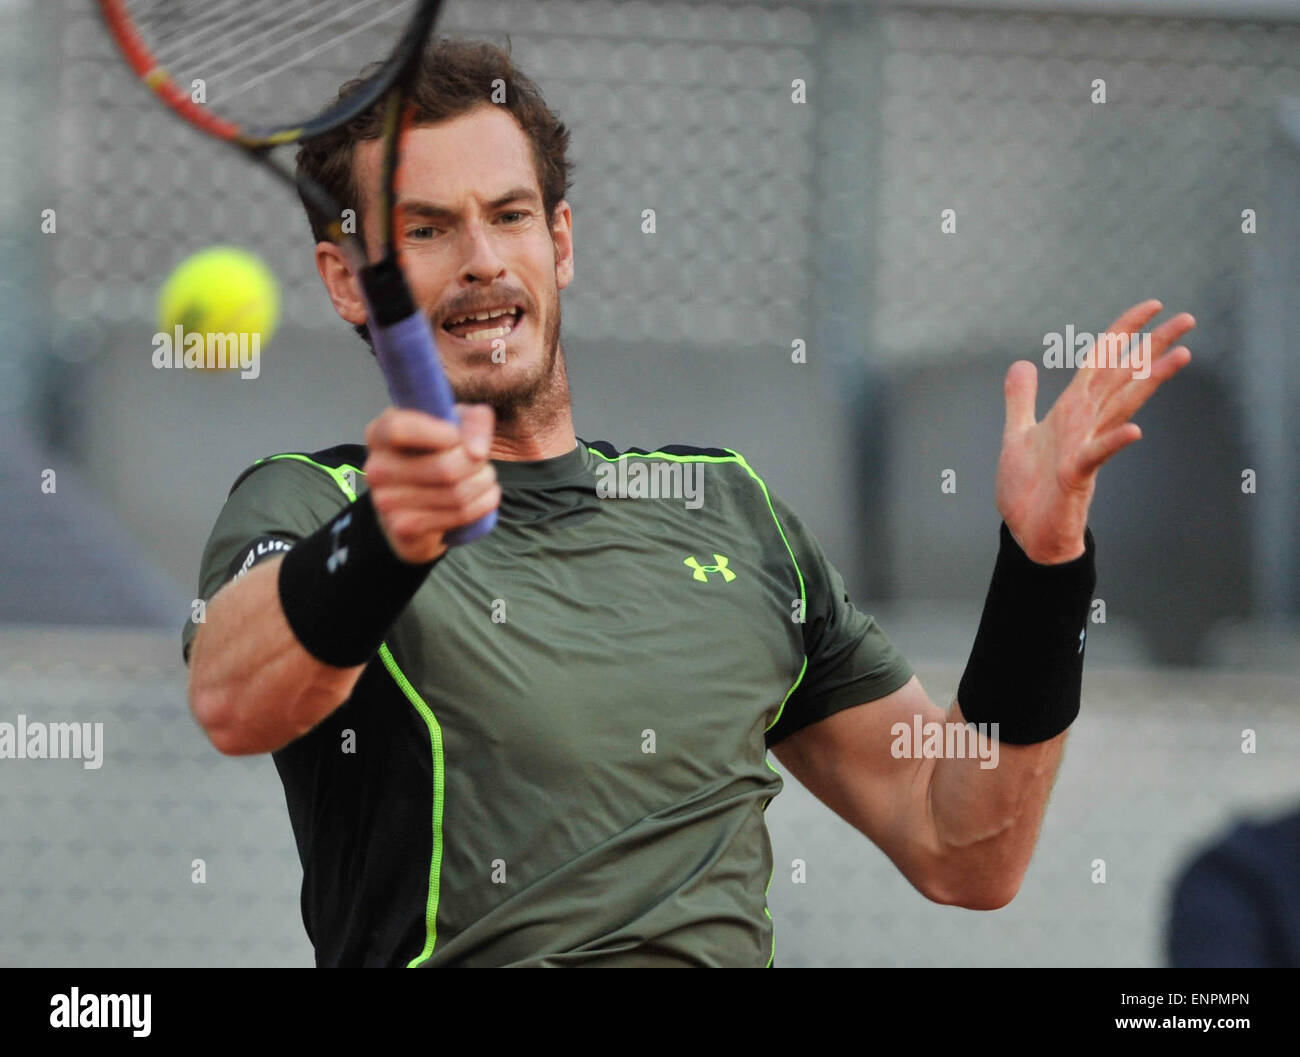 Madrid, Spain. 9th May, 2015. Andy Murray of Britain hits a return during a men's singles semifinal match against Kei Nishikori of Japan at the Madrid Open tennis tournament in Madrid, Spain, May 9, 2015. Andy Murray won 2-0. Credit:  Xie Haining/Xinhua/Alamy Live News Stock Photo